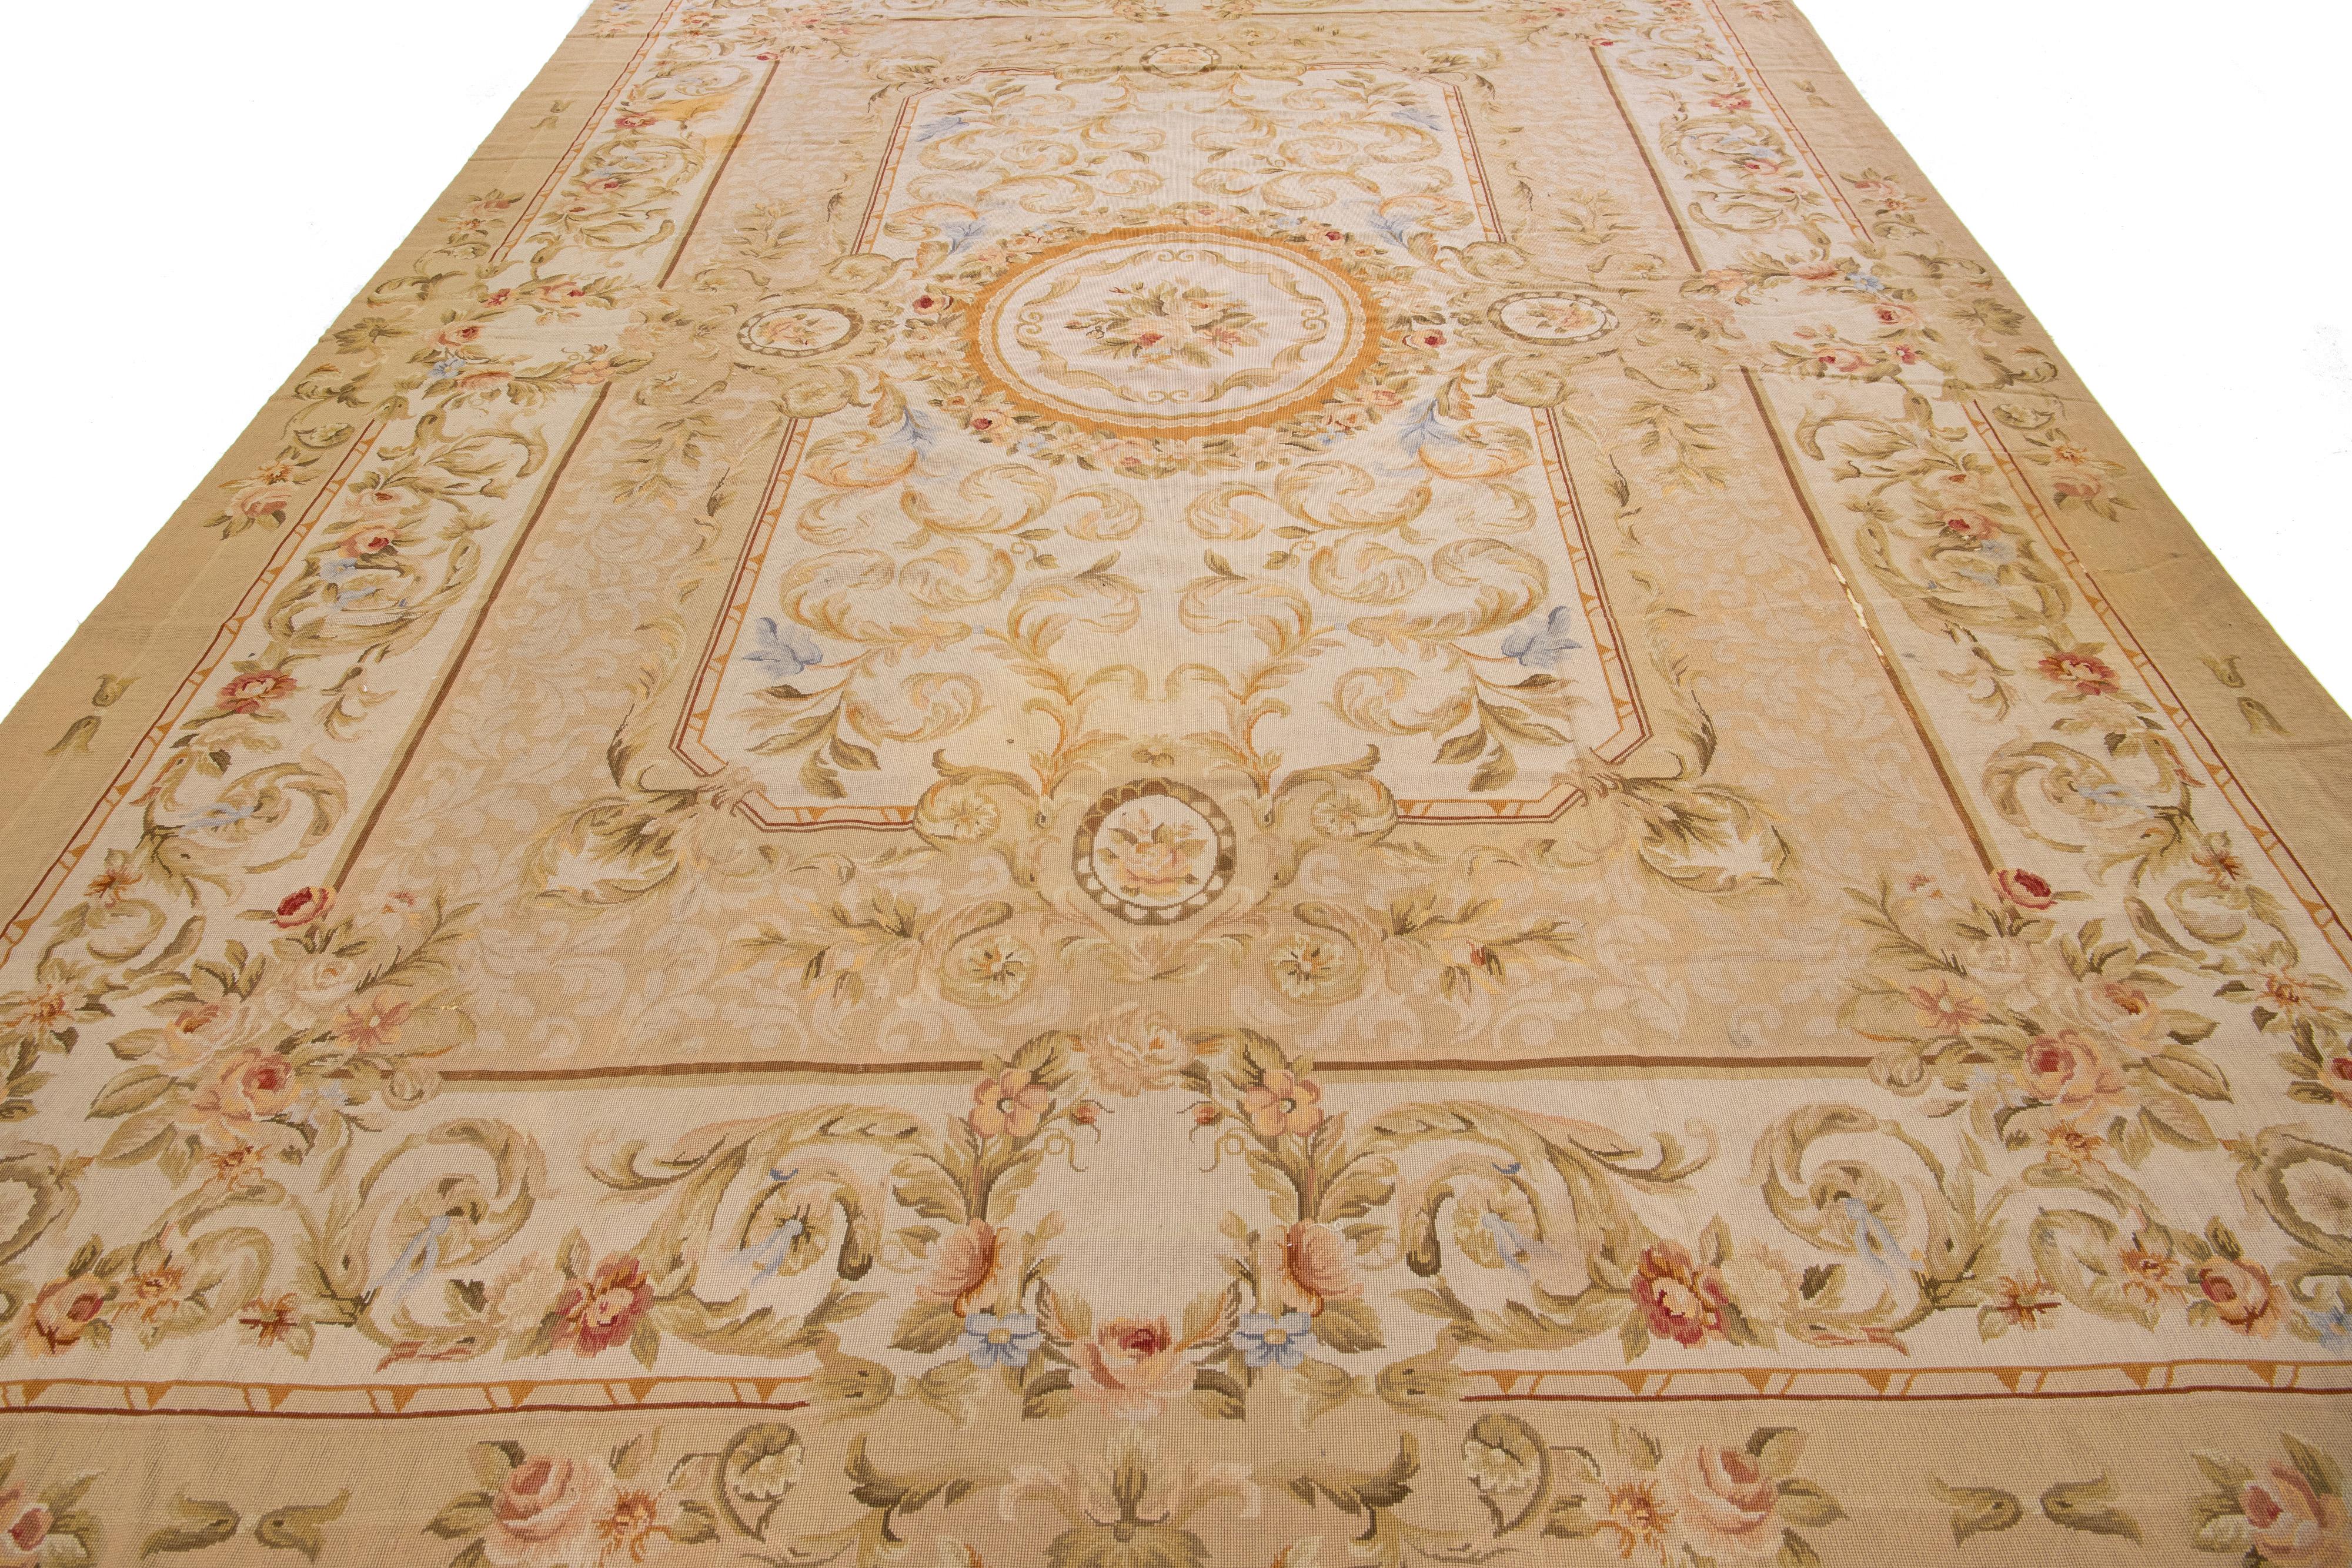 This elegant vintage Aubusson needlepoint wool rug boasts a beige color field. The rug is adorned with finely detailed, exquisite floral patterns all over its design.

This rug measures 9'9